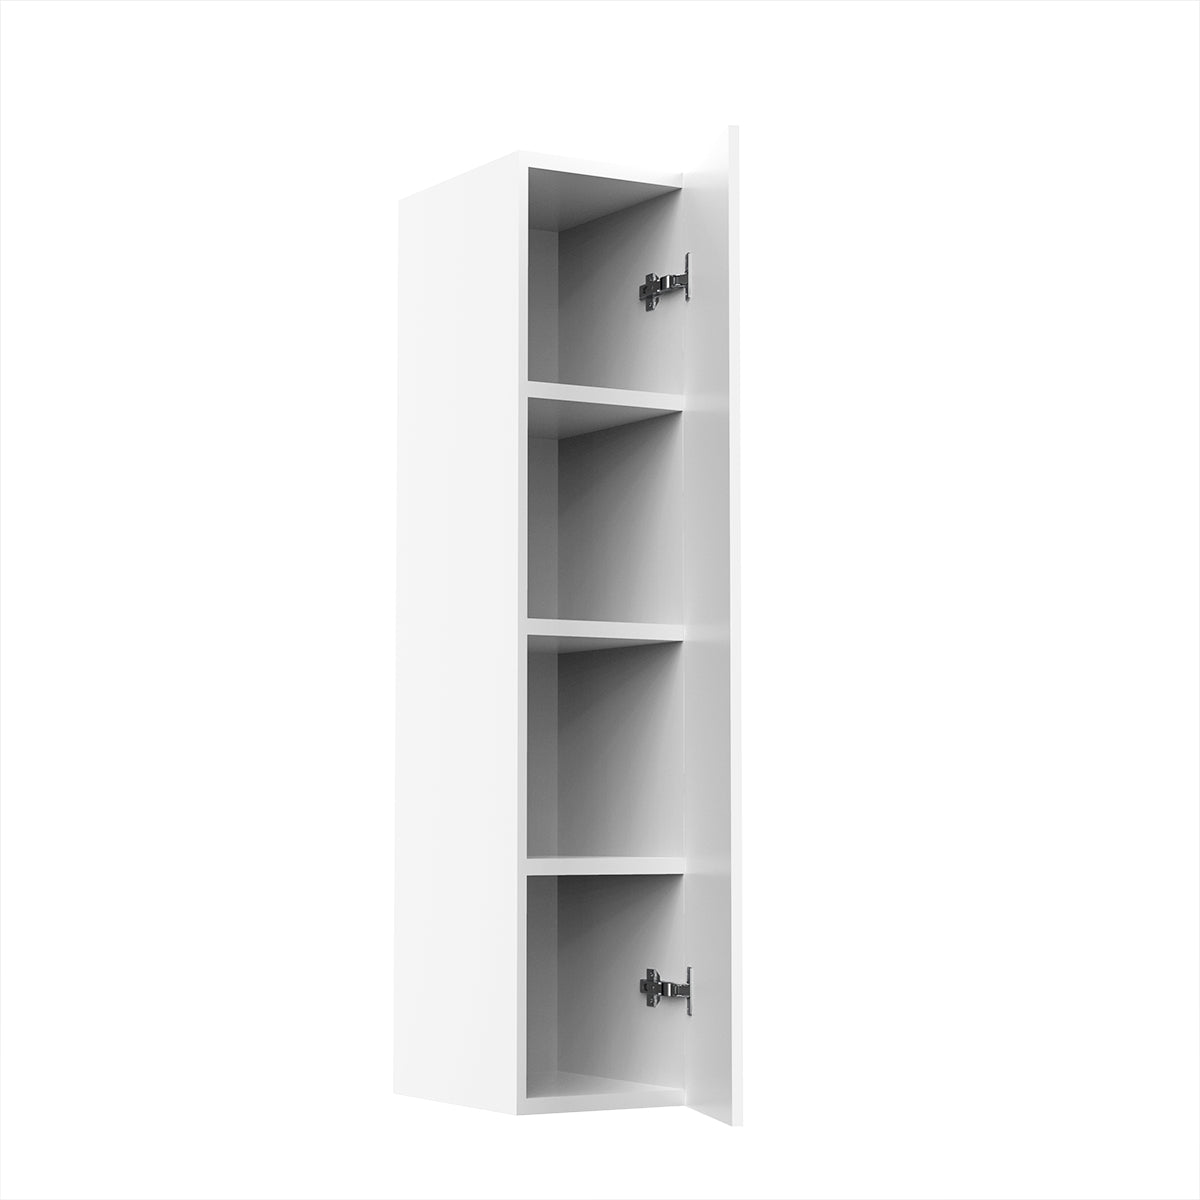 RTA - Glossy White - Single Door Wall Cabinets | 9"W x 42"H x 12"D